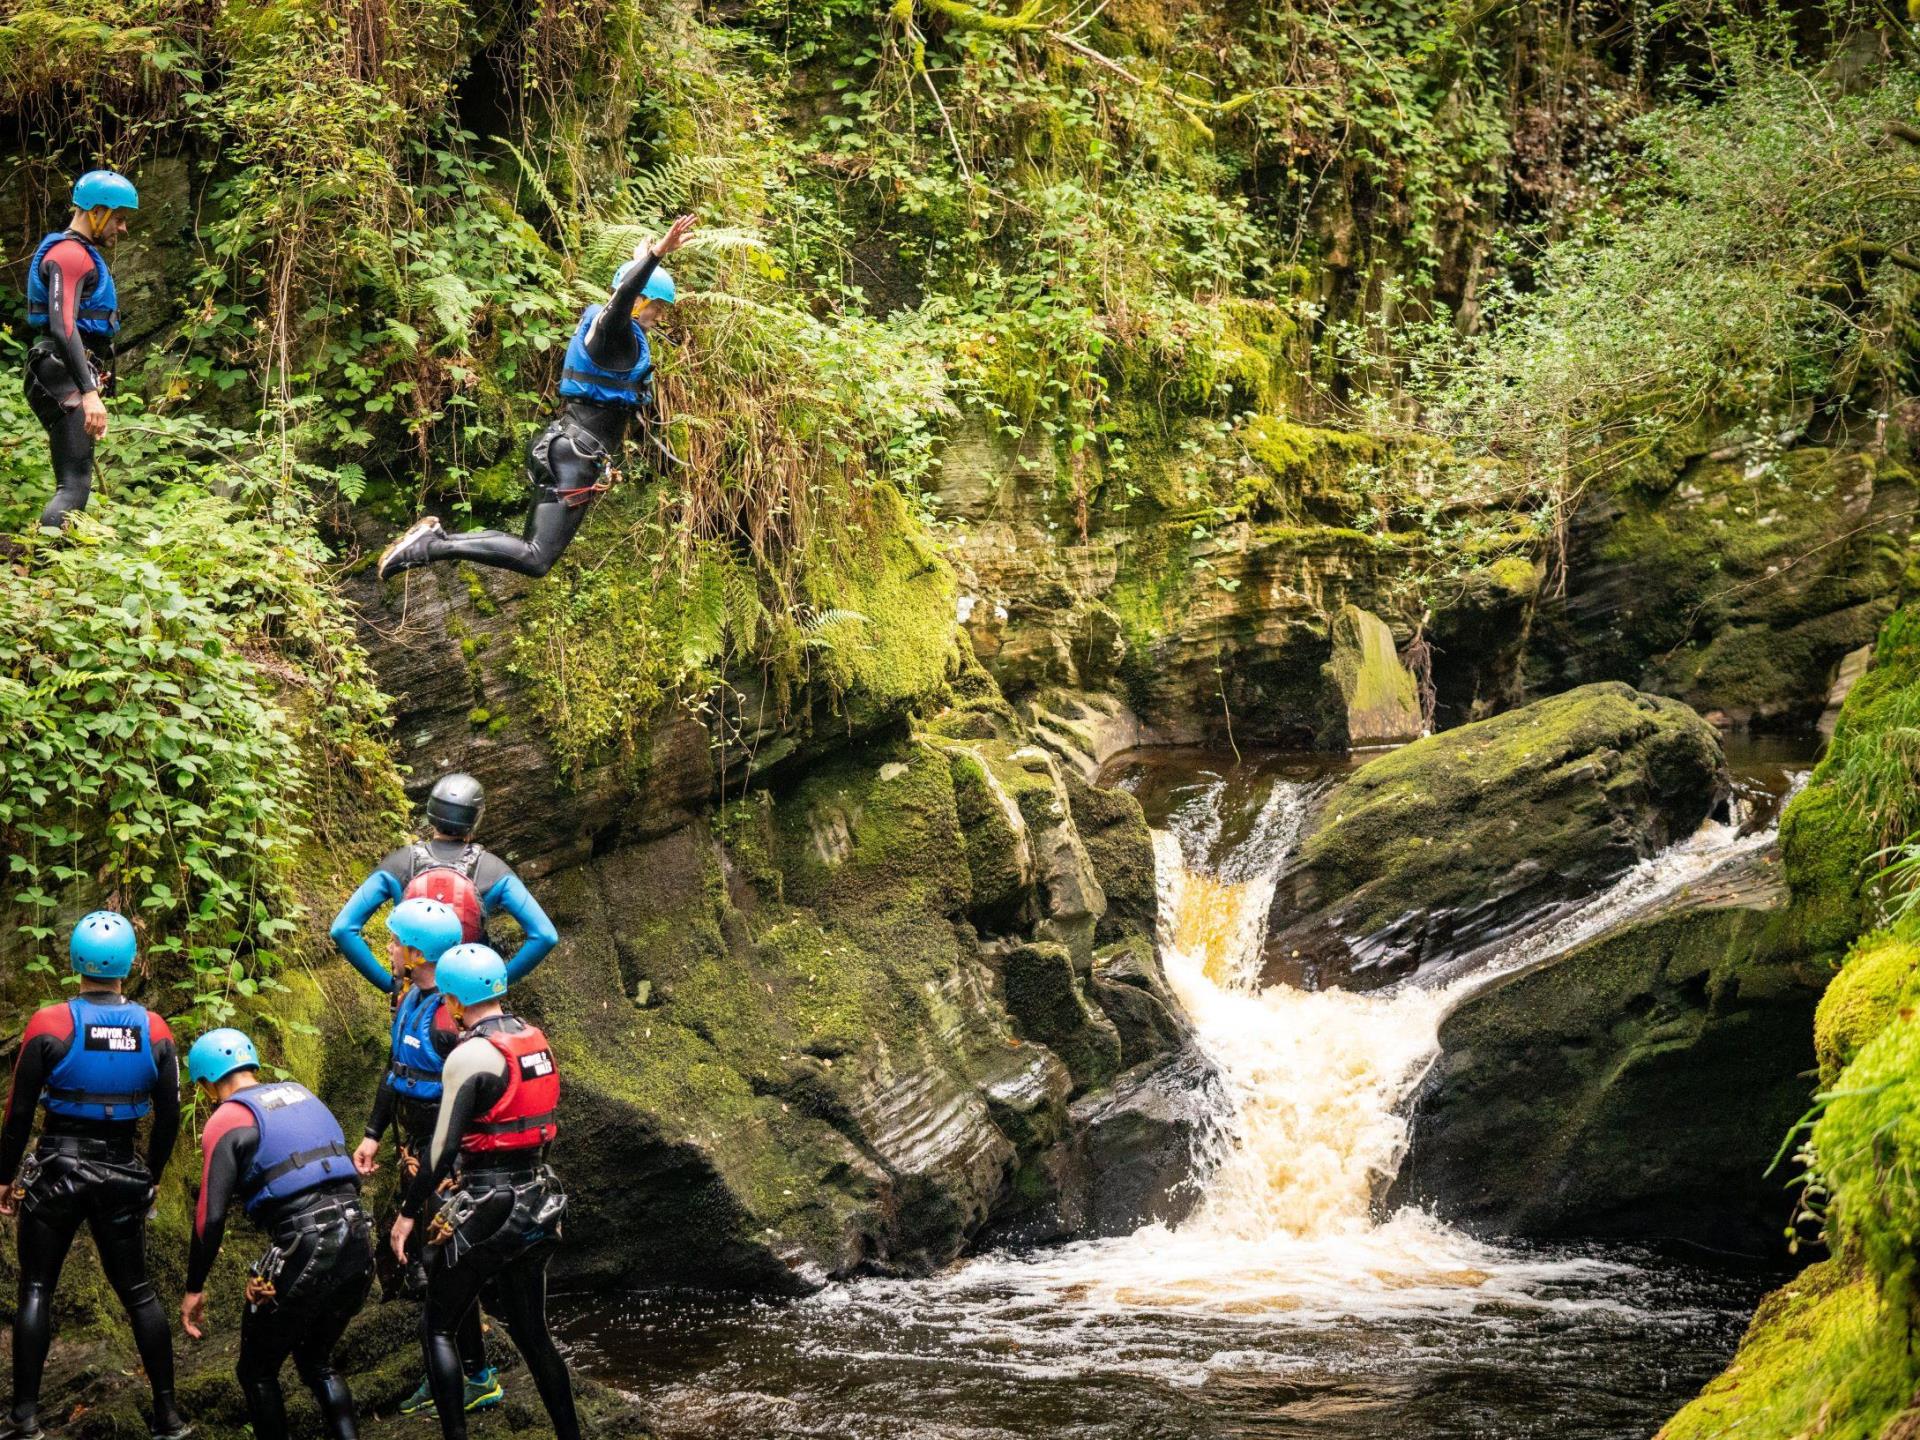 Canyoning on the Adventure North Wales holiday